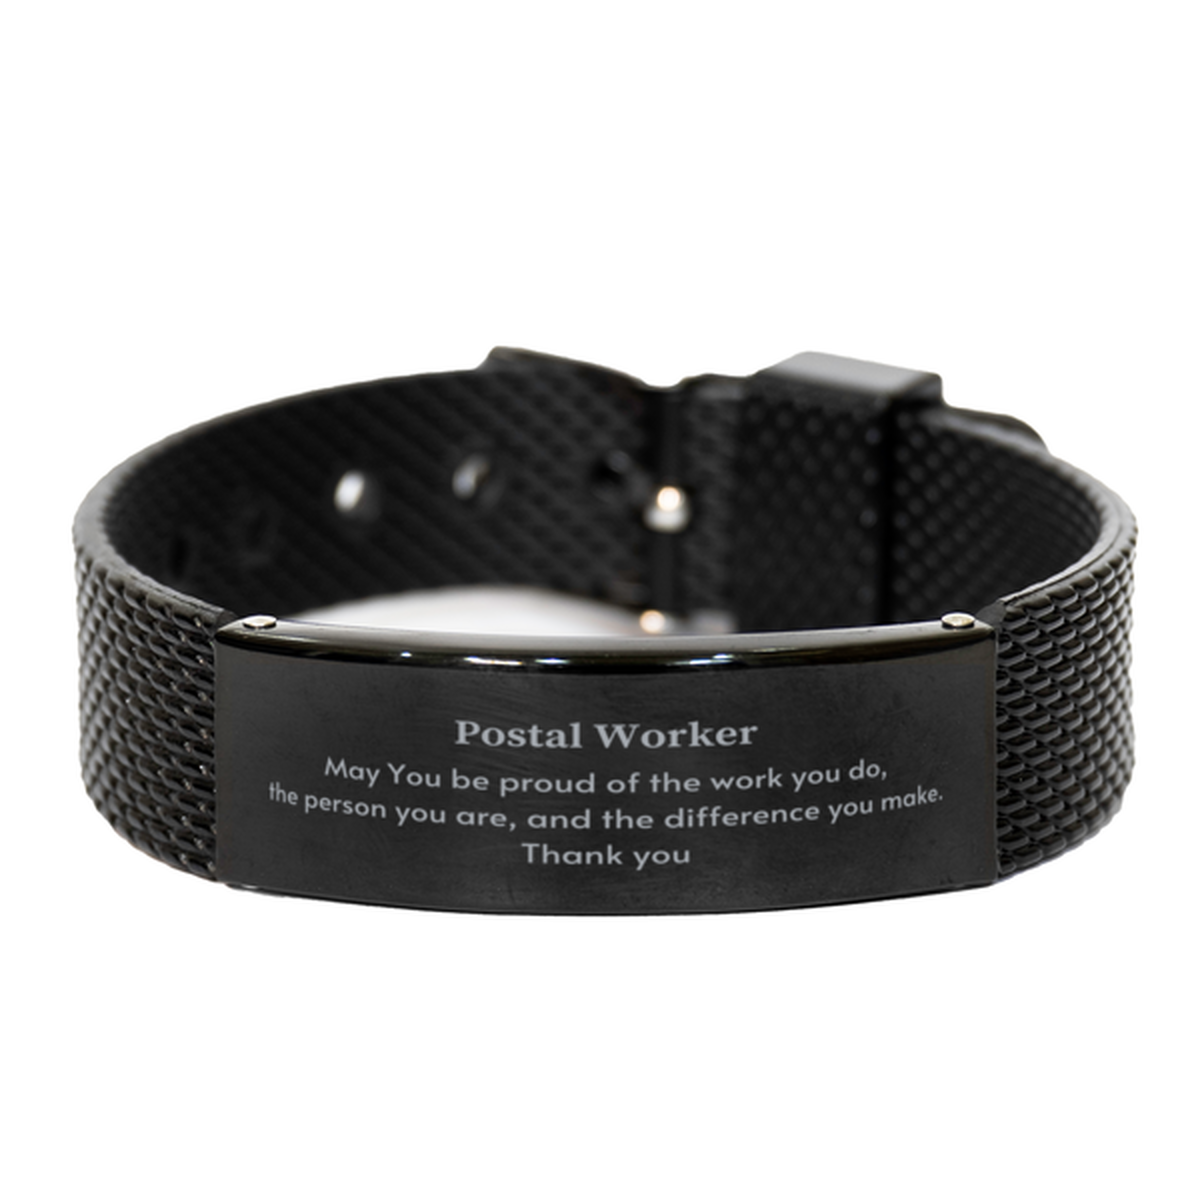 Heartwarming Black Shark Mesh Bracelet Retirement Coworkers Gifts for Postal Worker, Postal Worker May You be proud of the work you do, the person you are Gifts for Boss Men Women Friends